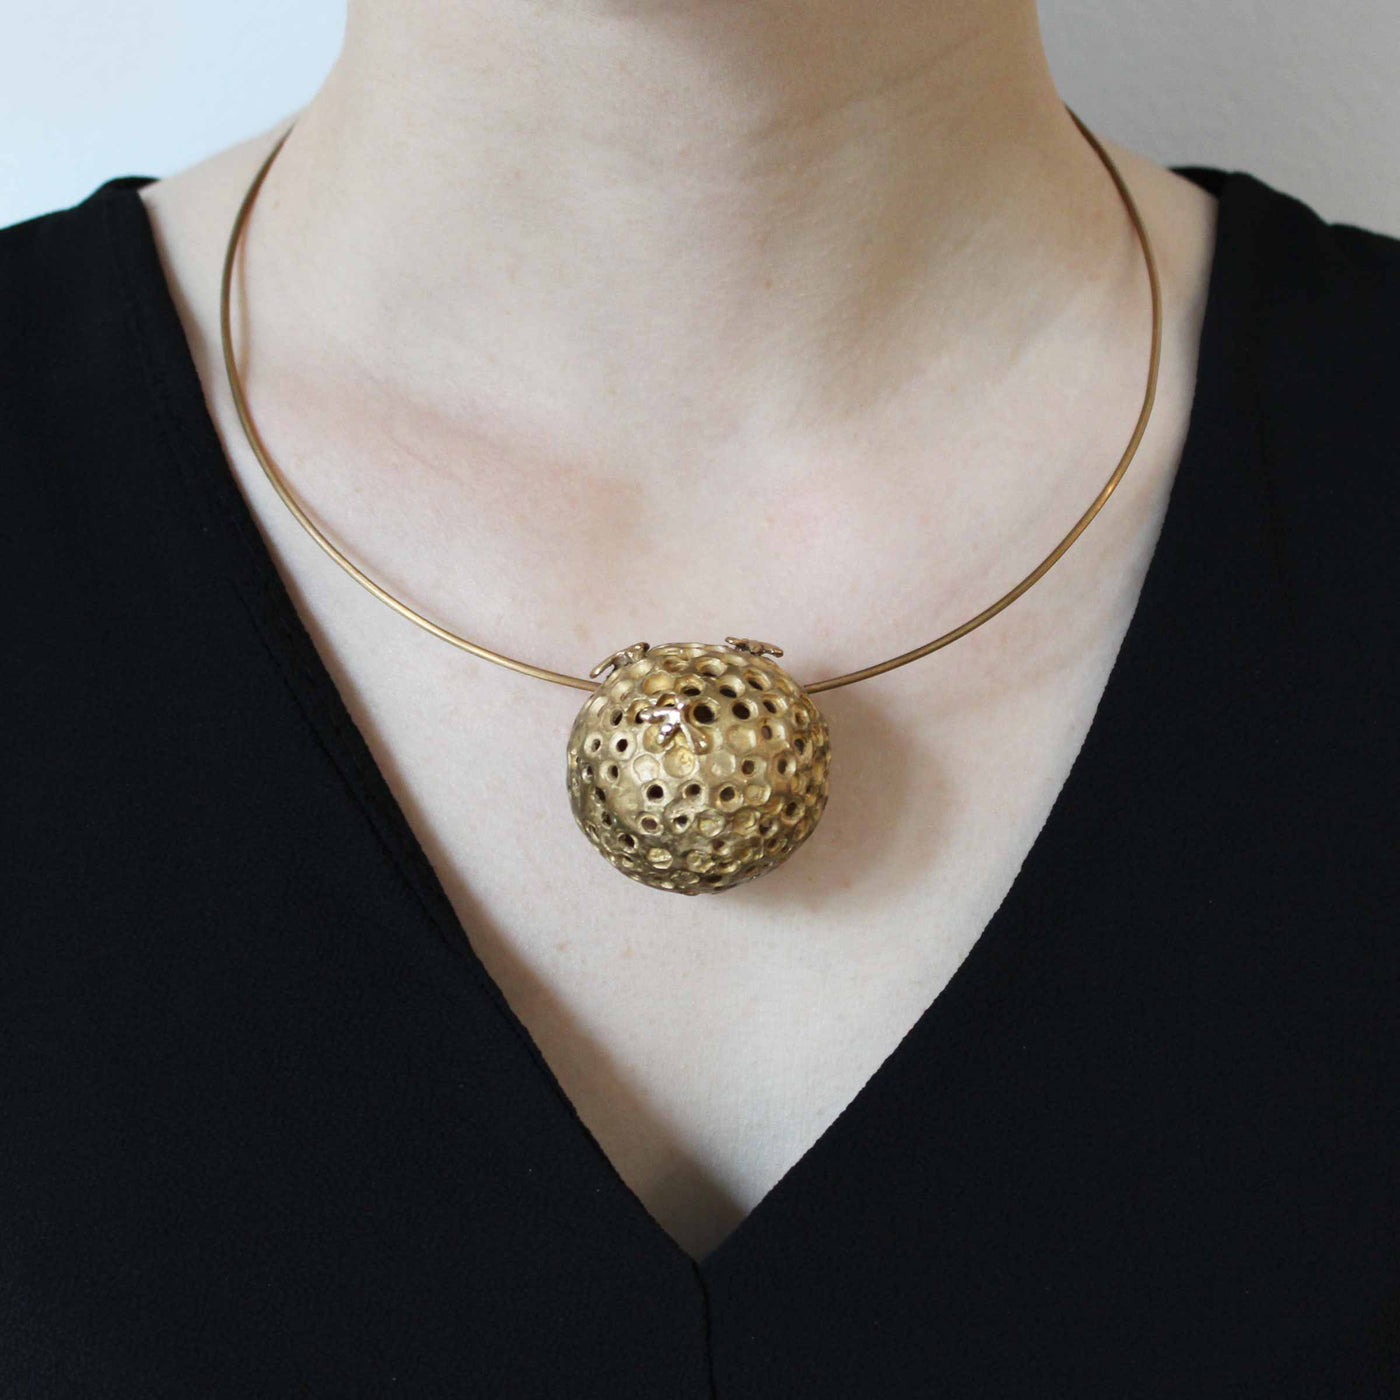 Bronze Necklace BEEHIVE by Jessica Carroll for BABS Art Gallery - Limited Edition 02